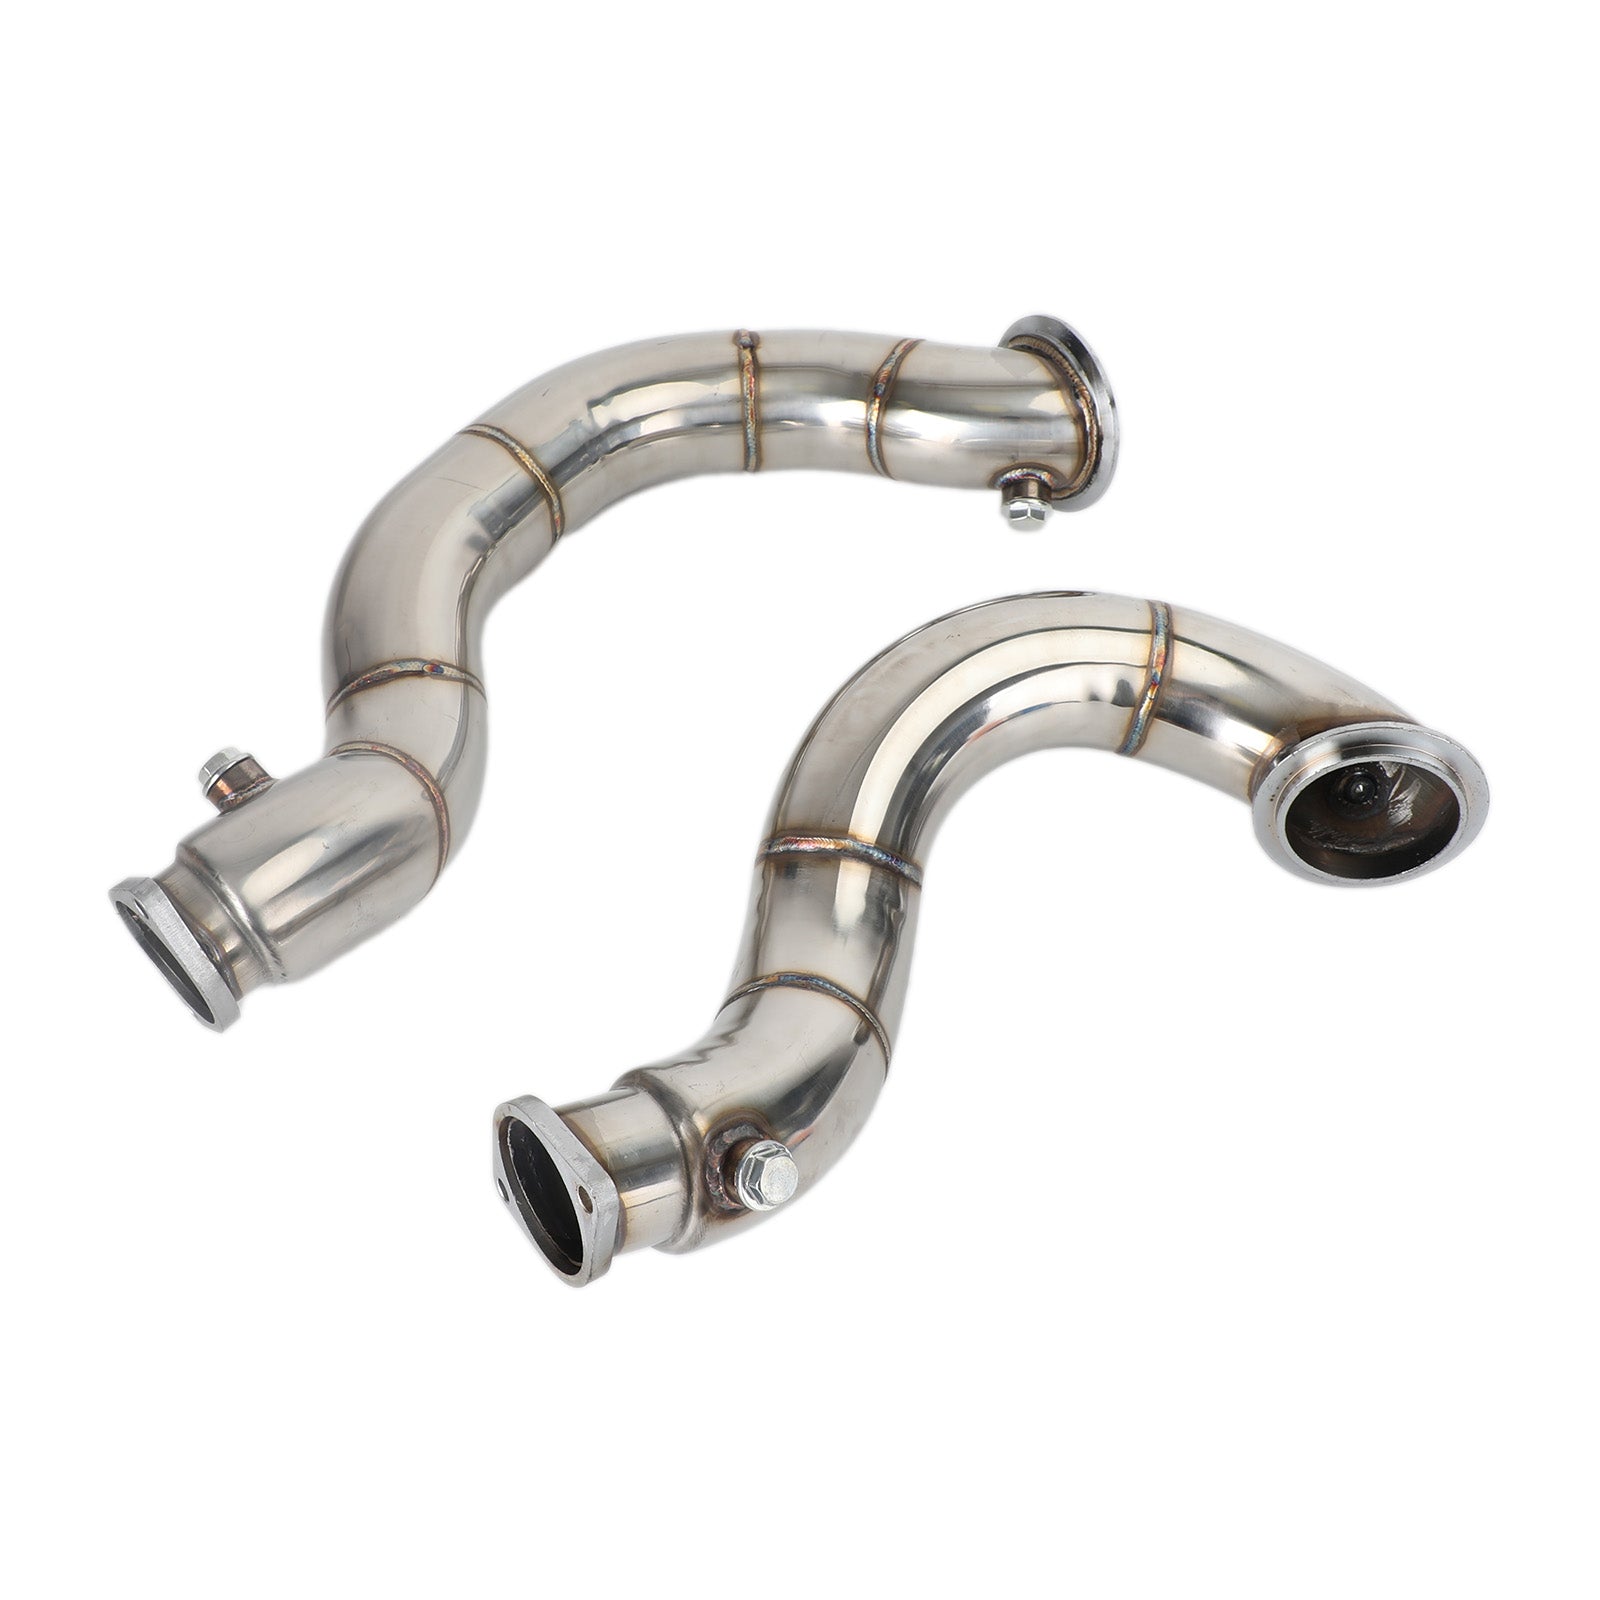 BMW 2007-2011 N54 335i E90 E92 3 inch Stainless Steel Exhaust Downpipe Pipes